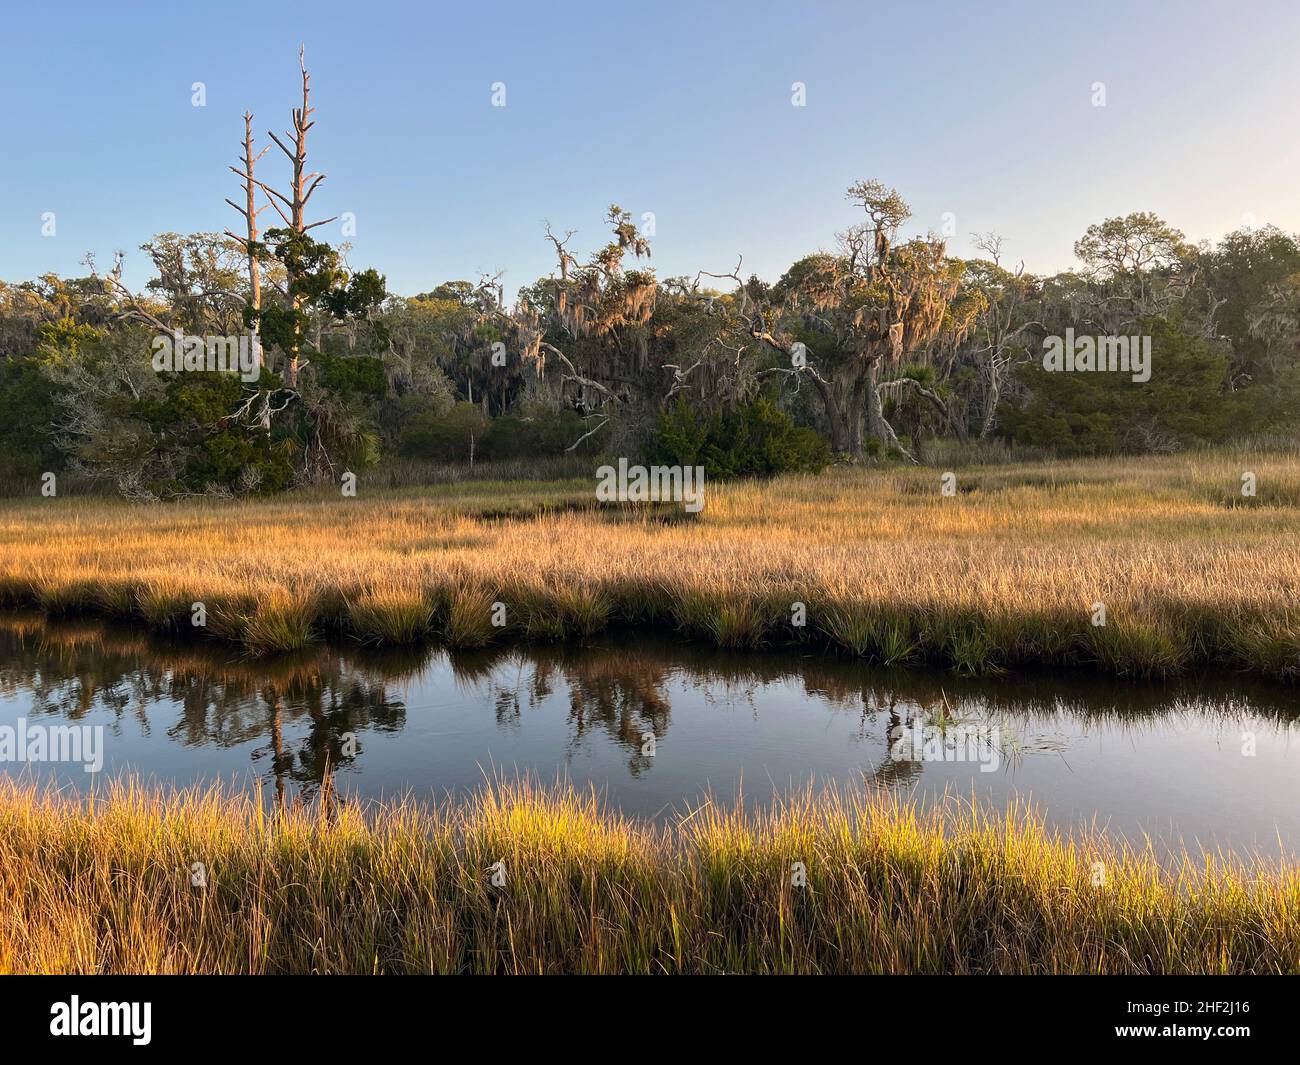 The salt marsh at Clam Creek, Jekyll Island, Georgia provides a unique maritime habitat in the lowcountry. Stock Photo